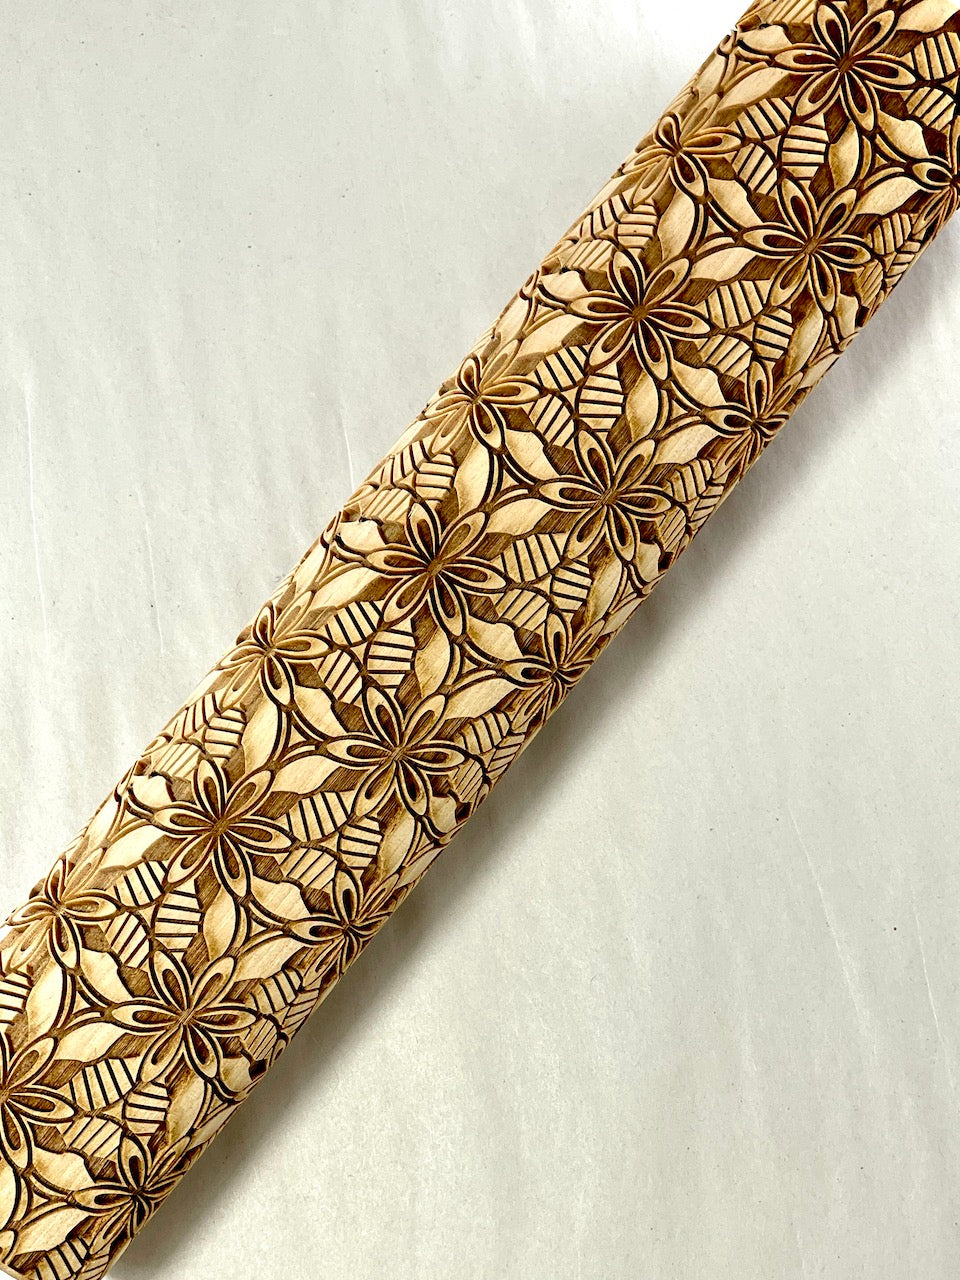 Grandma's Lace Textured Rolling Pin